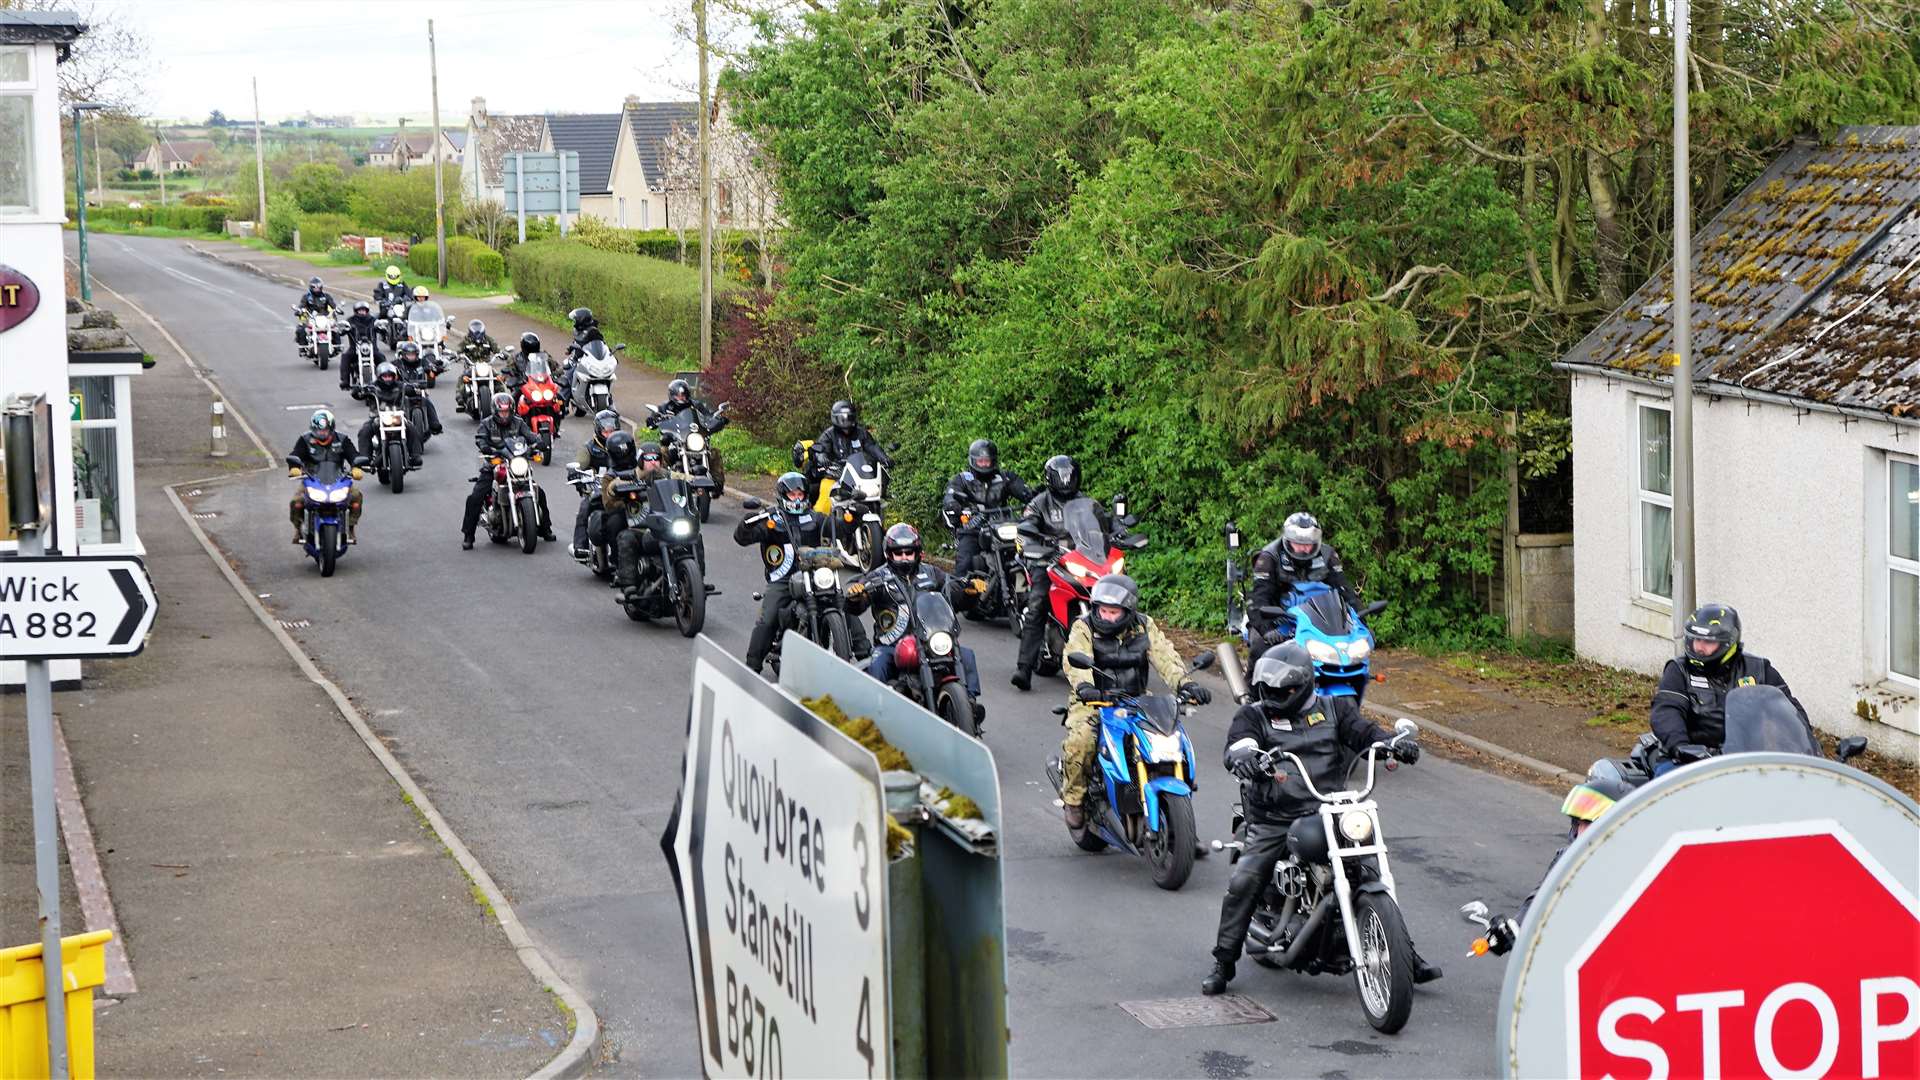 The bikers came down the B870 road and turned on to the A882 to have a short break in the village. Picture: DGS